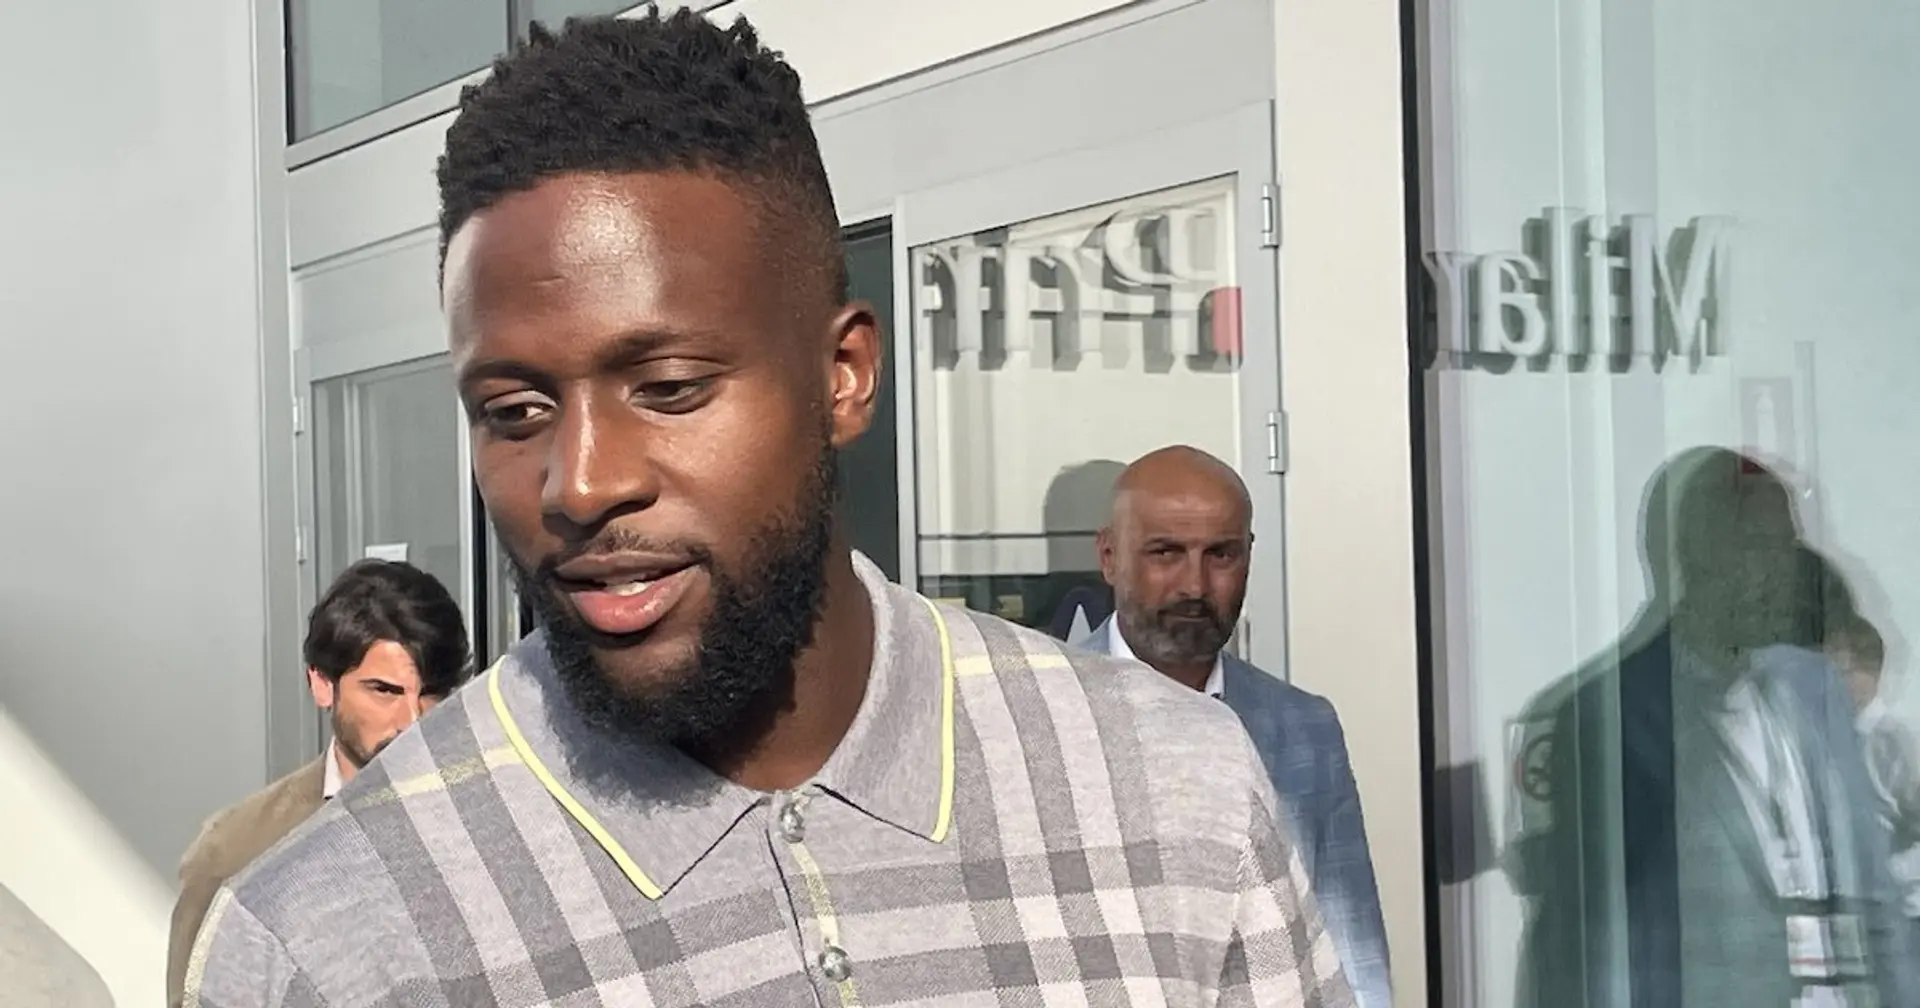 Divock Origi lands in Italy before completing AC Milan move